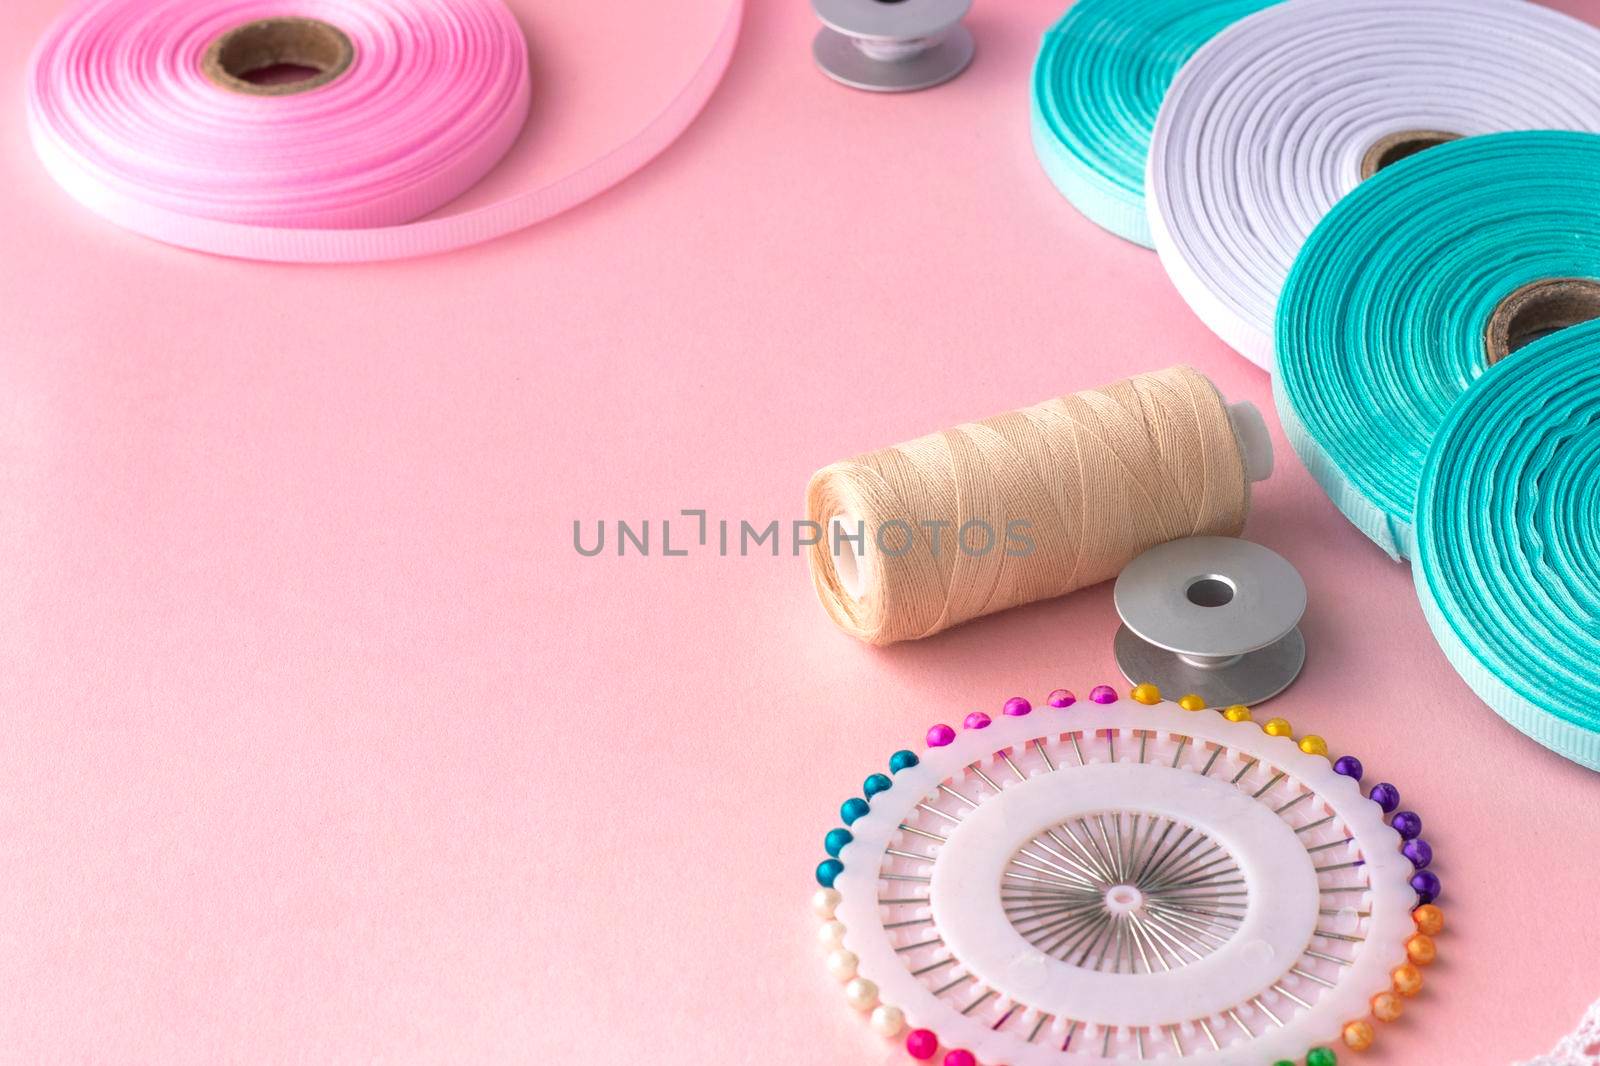 Handmade and sewing background. sewing accessories for needlework on pink background. Spool of thread, multicolored tapes, sewing supplies. Handmade set with copy space. High quality photo